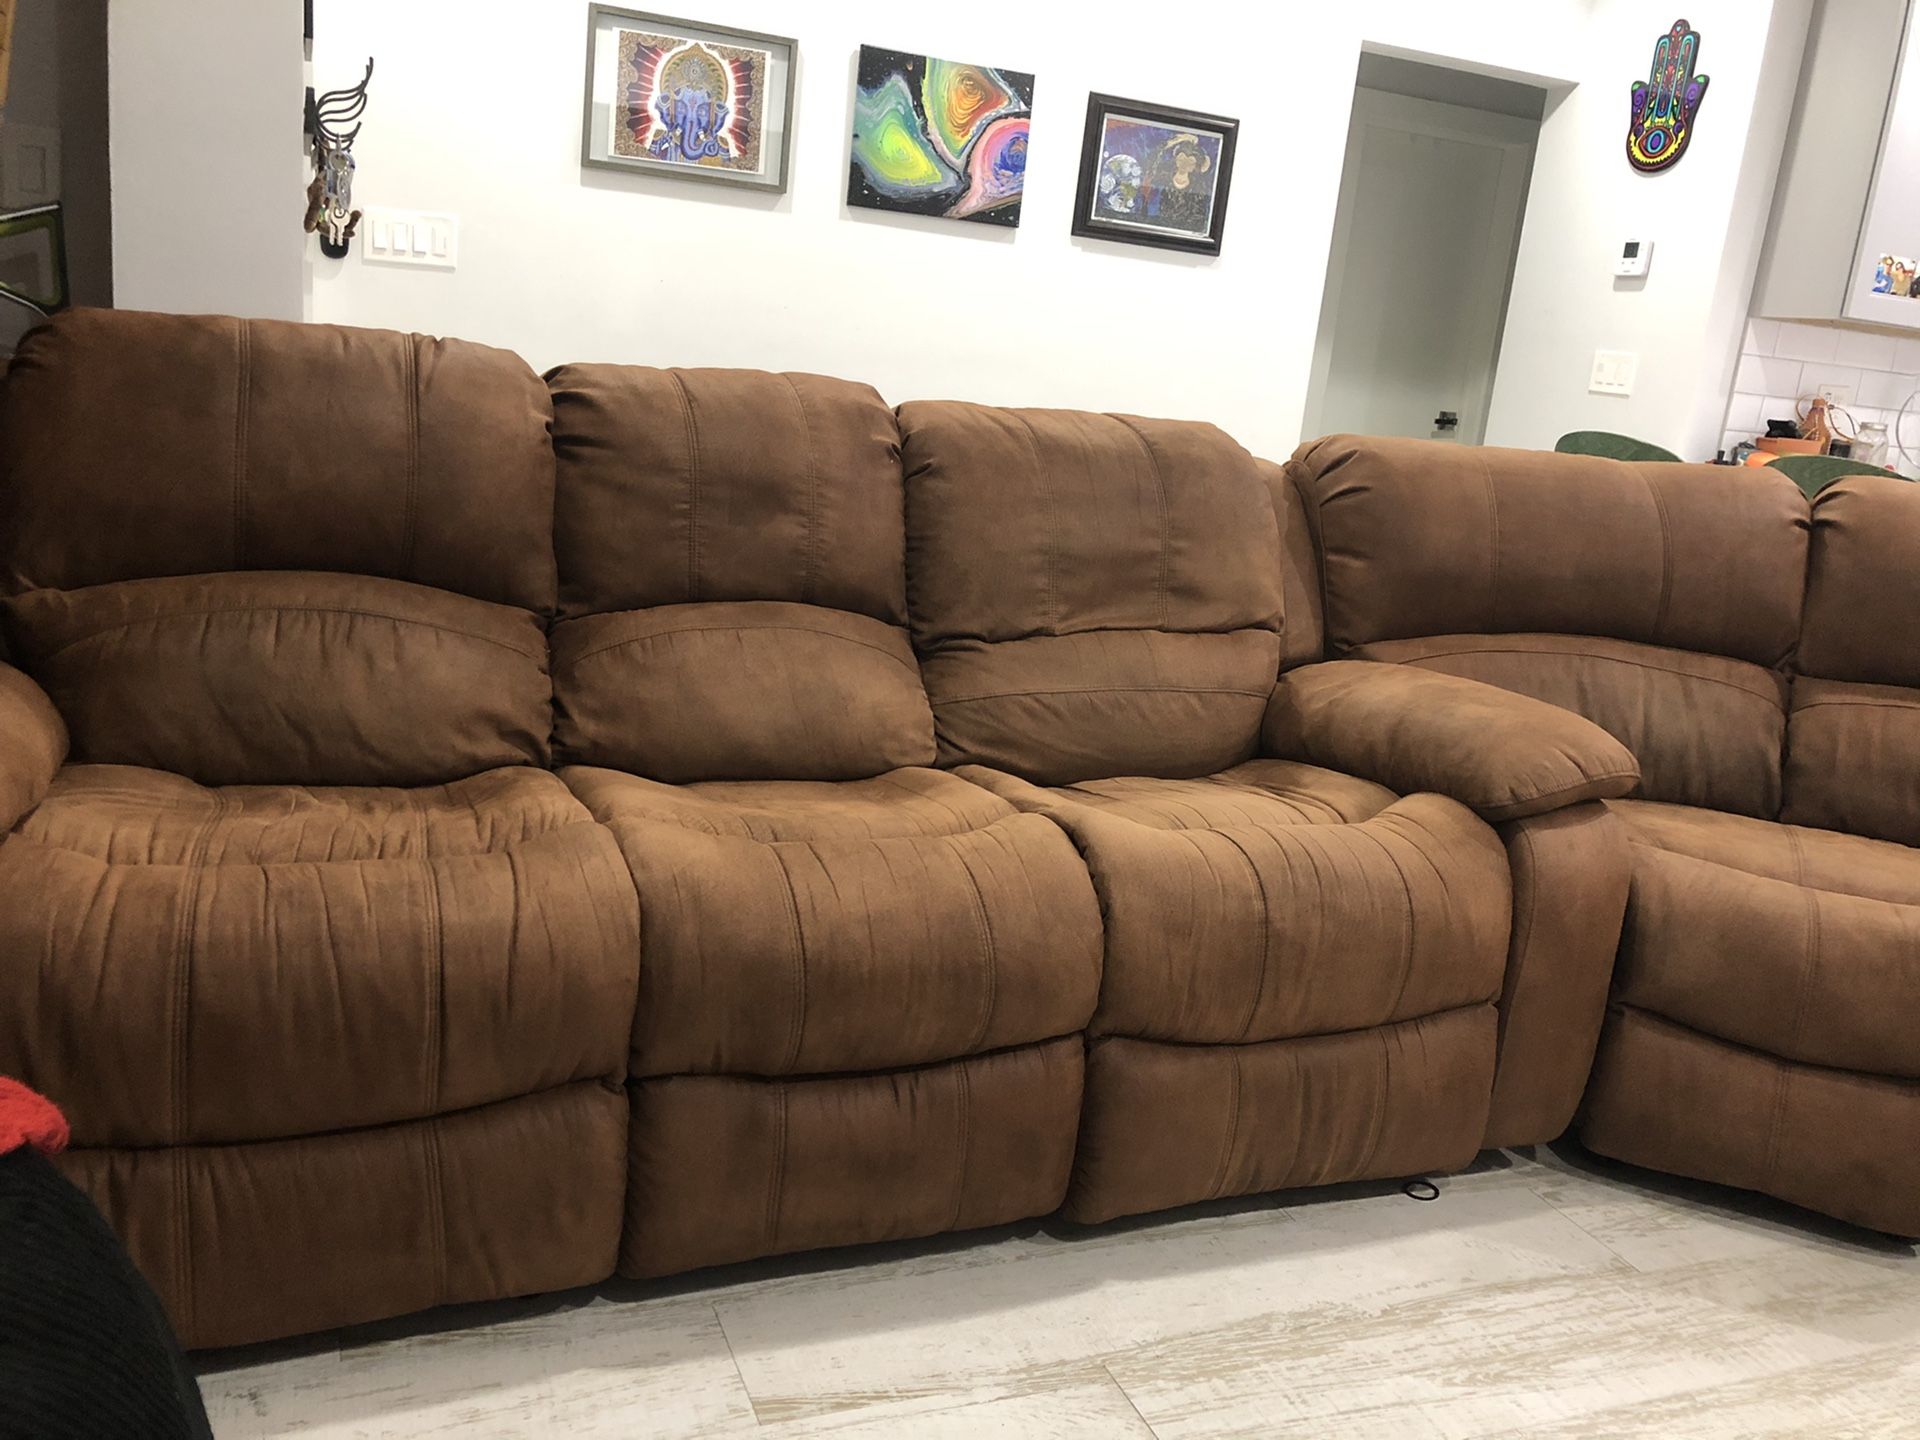 Large suede couch